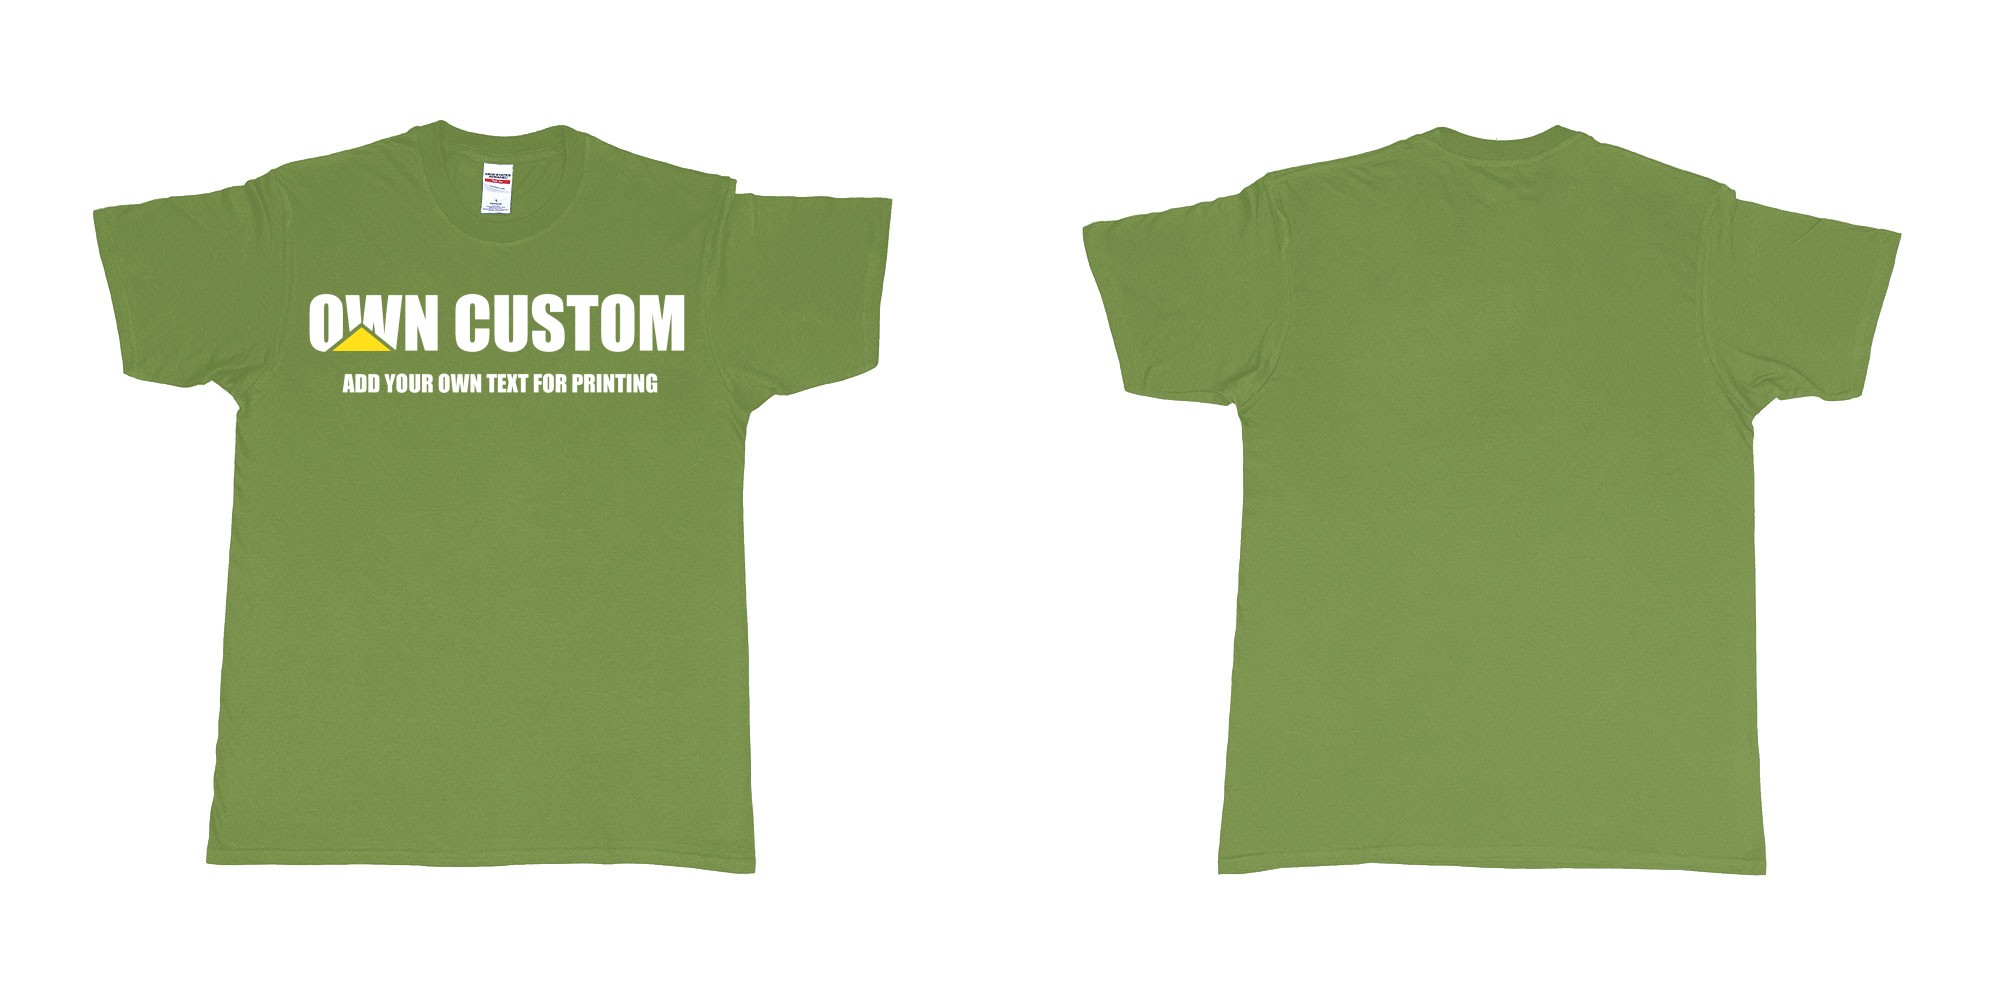 Custom tshirt design caterpillar inc logo custom text printing shirt in fabric color military-green choice your own text made in Bali by The Pirate Way